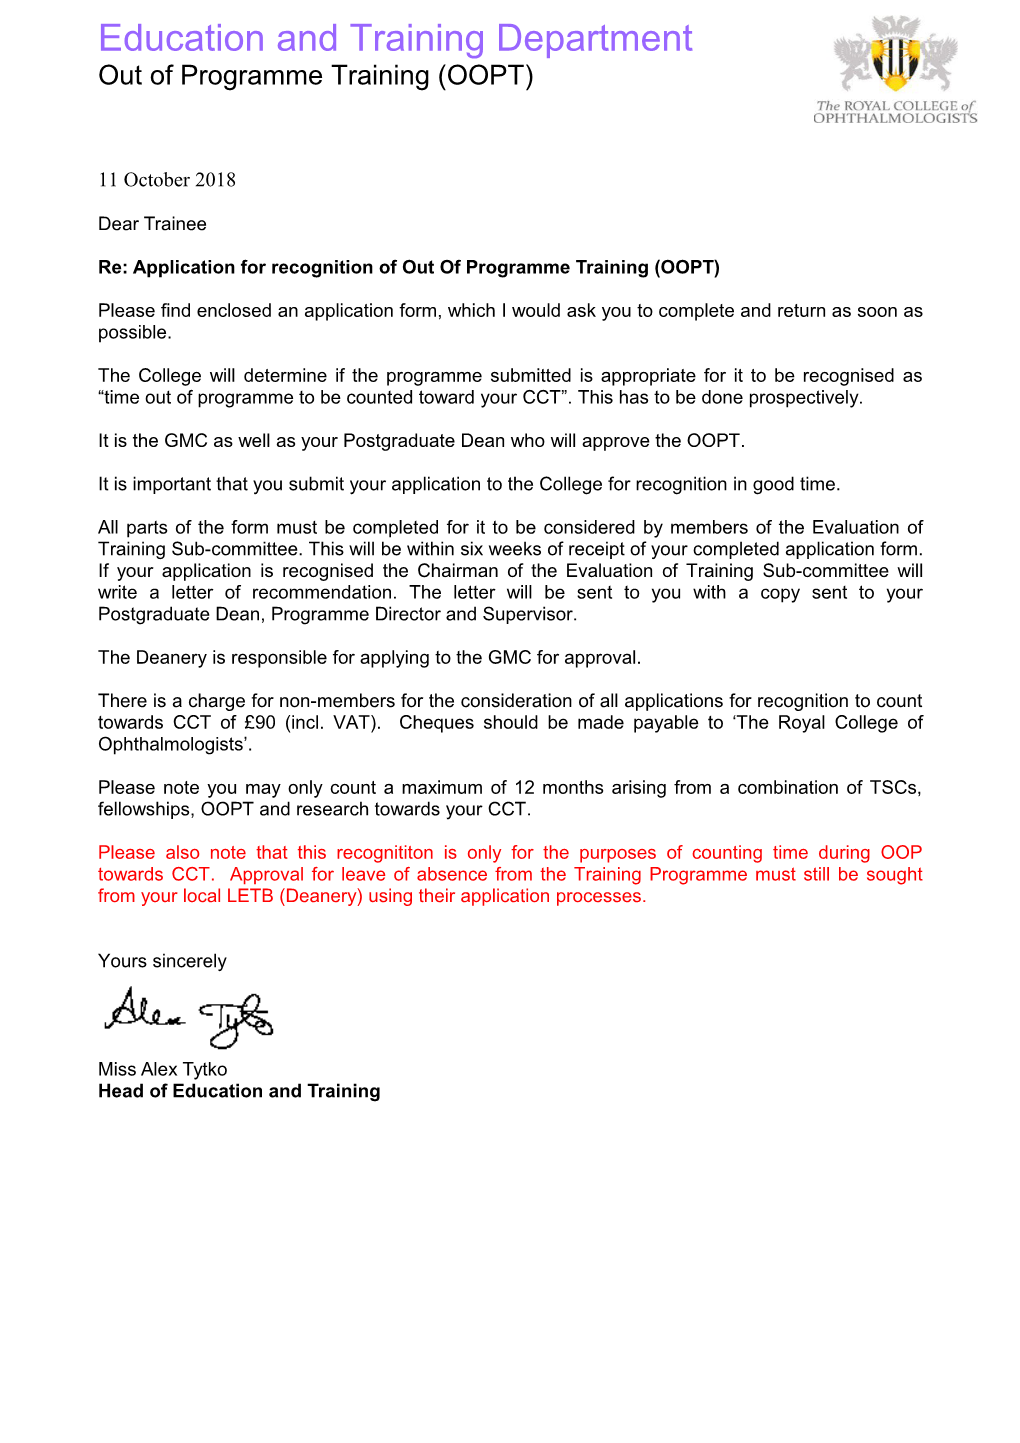 Re: Application for Recognition of out of Programme Training (OOPT)